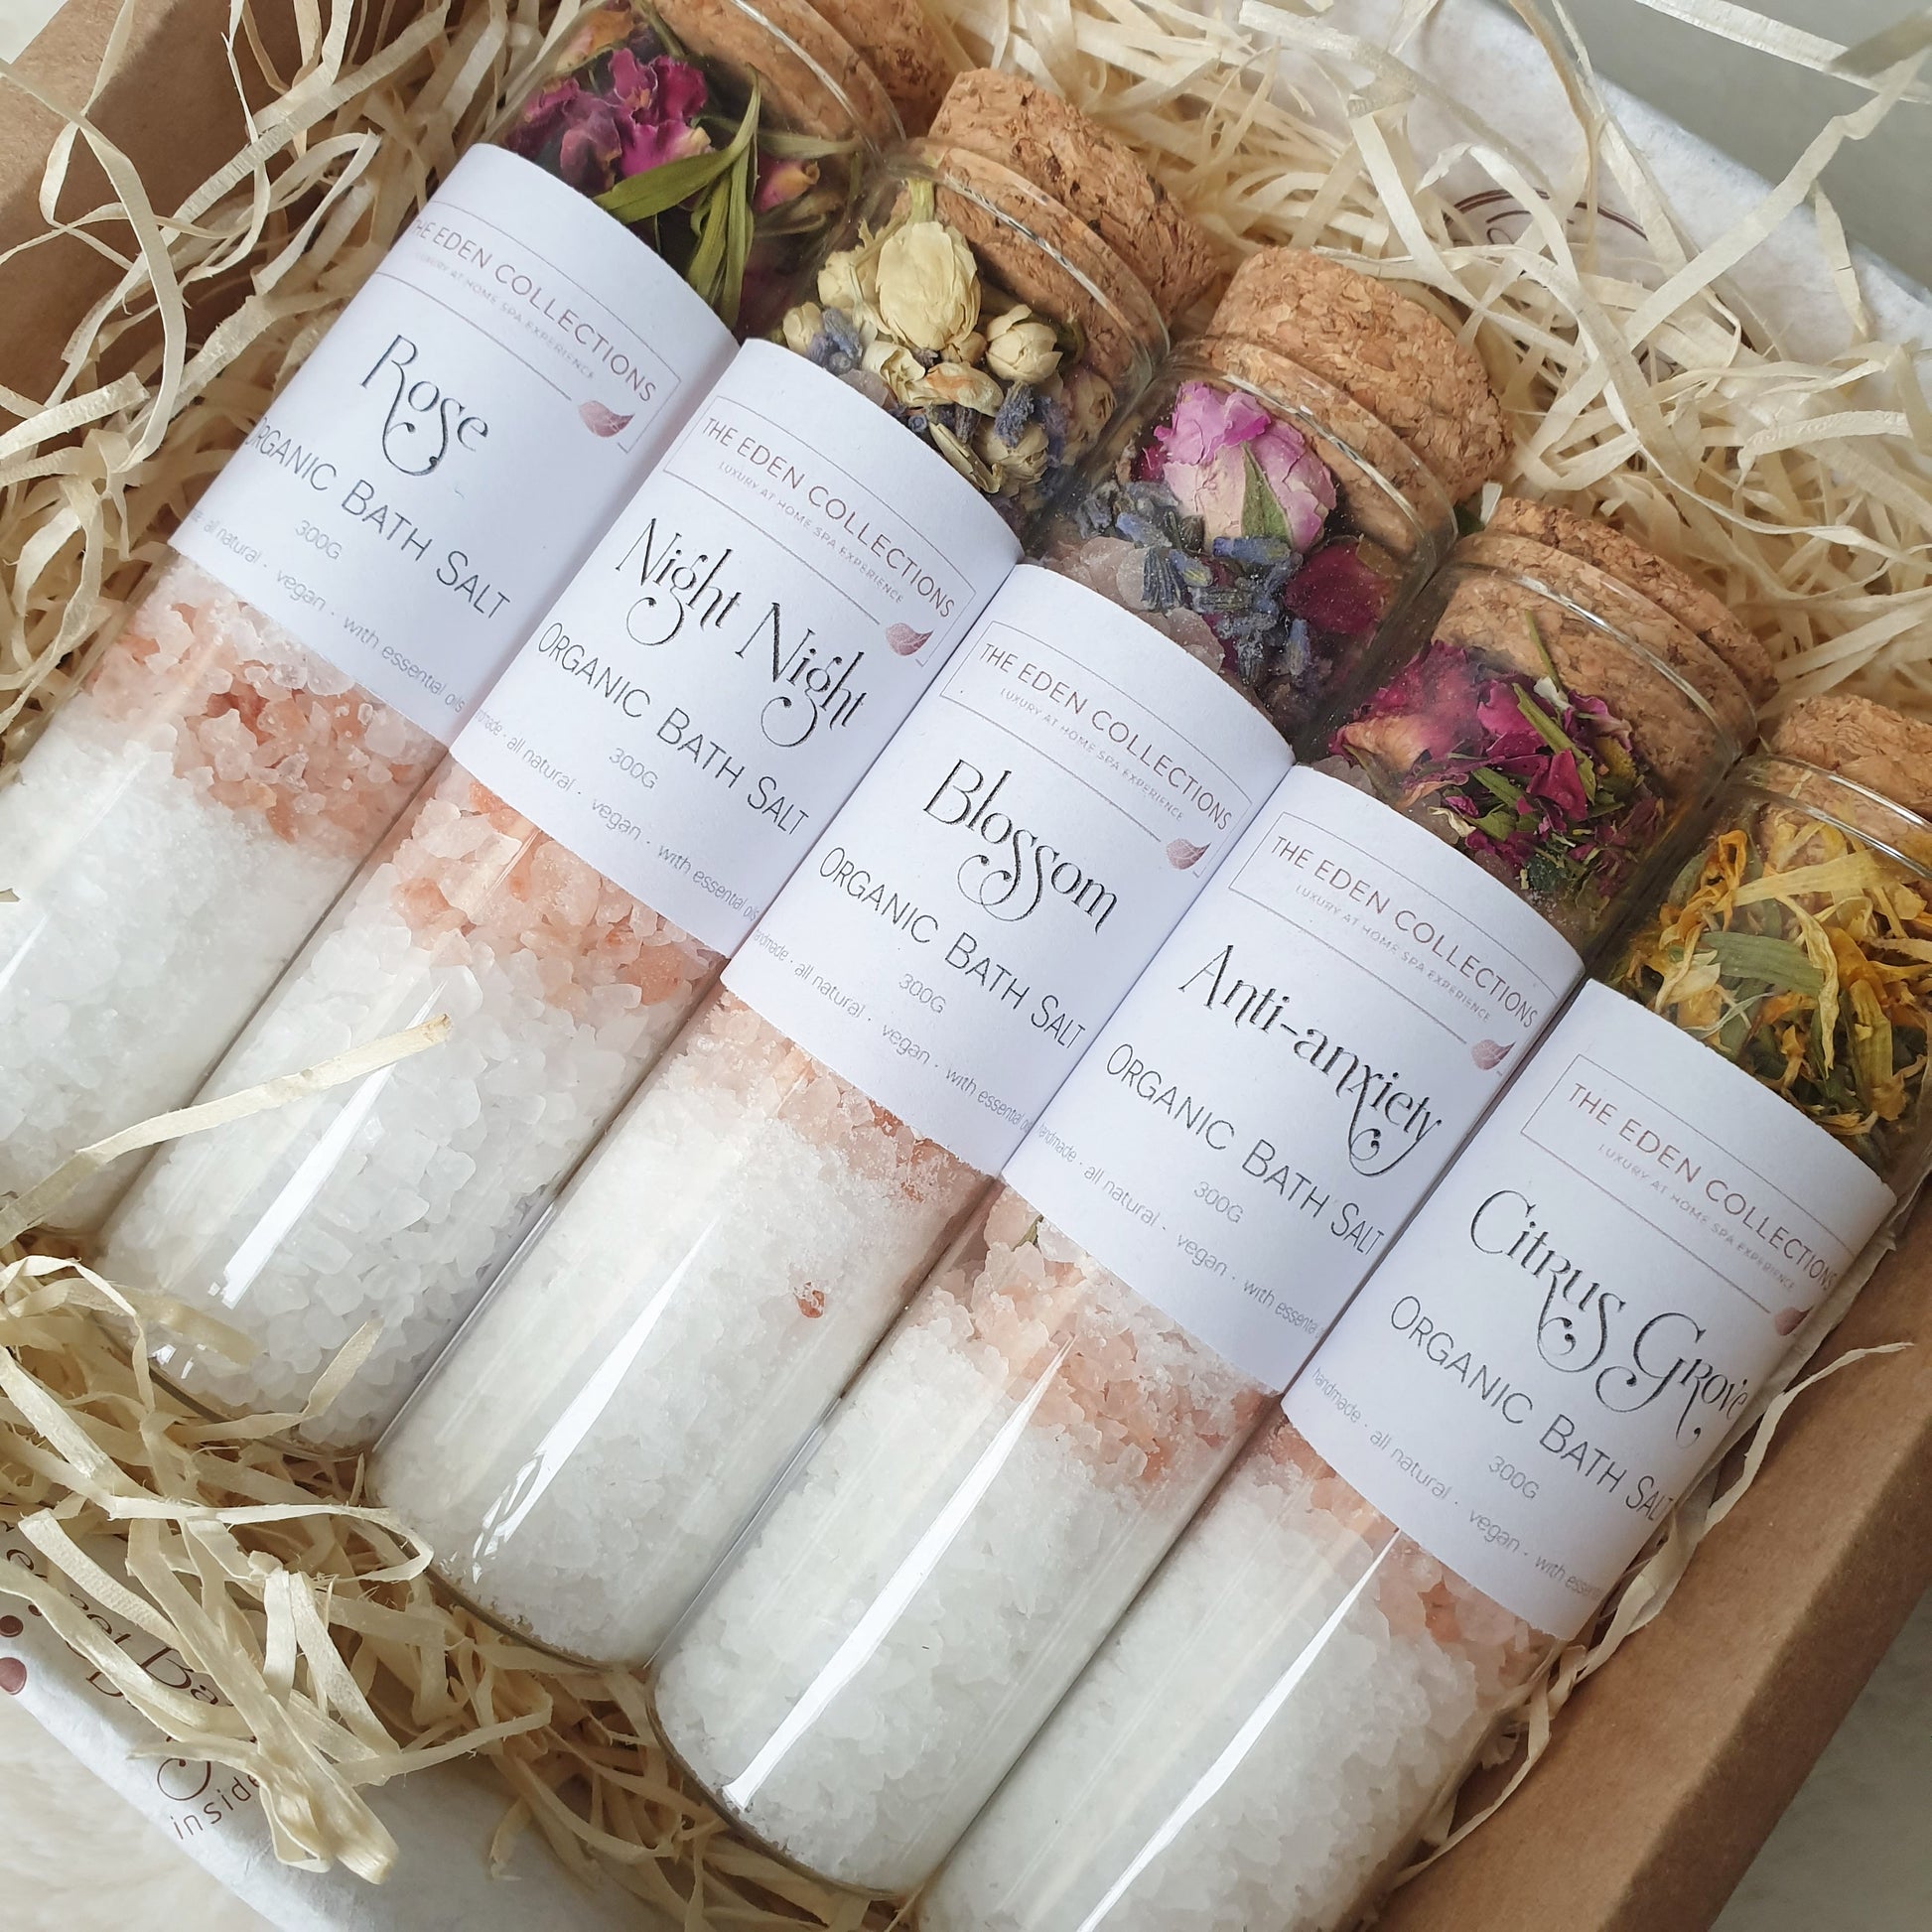 A range of The Eden Collections organic bath salts displayed inside their gift packaging.